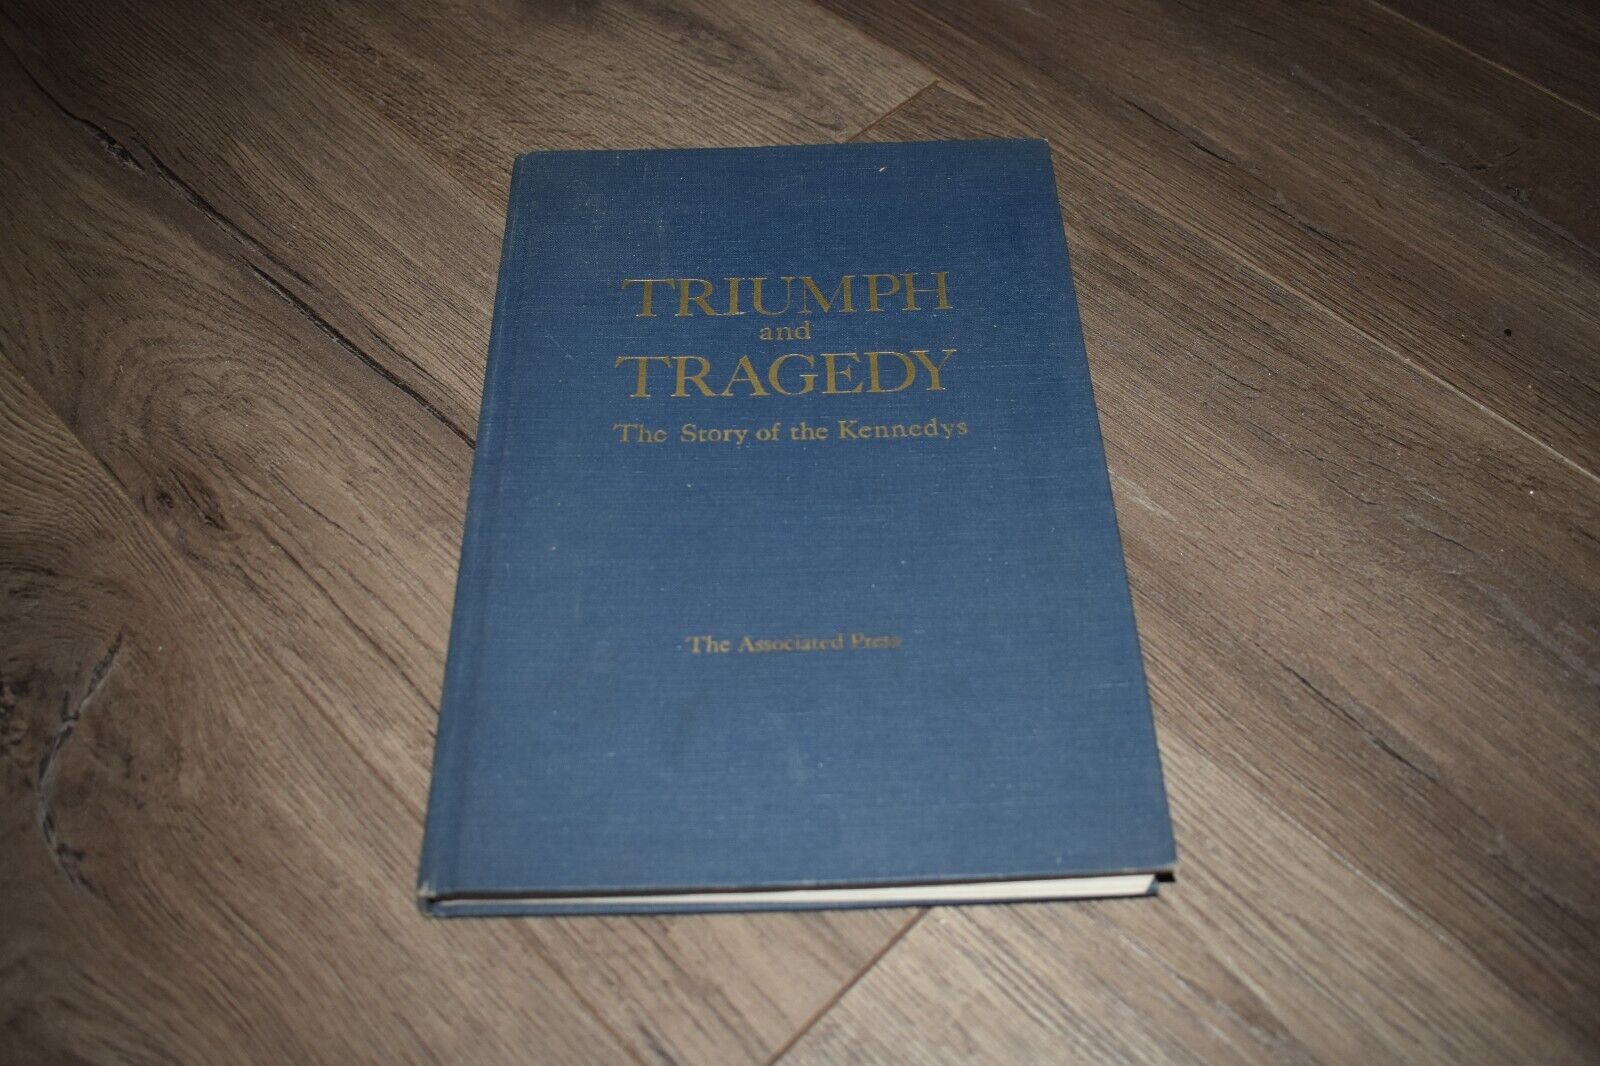 Triumph & Tragedy: The Story of the Kennedys by the Associated Press 1968